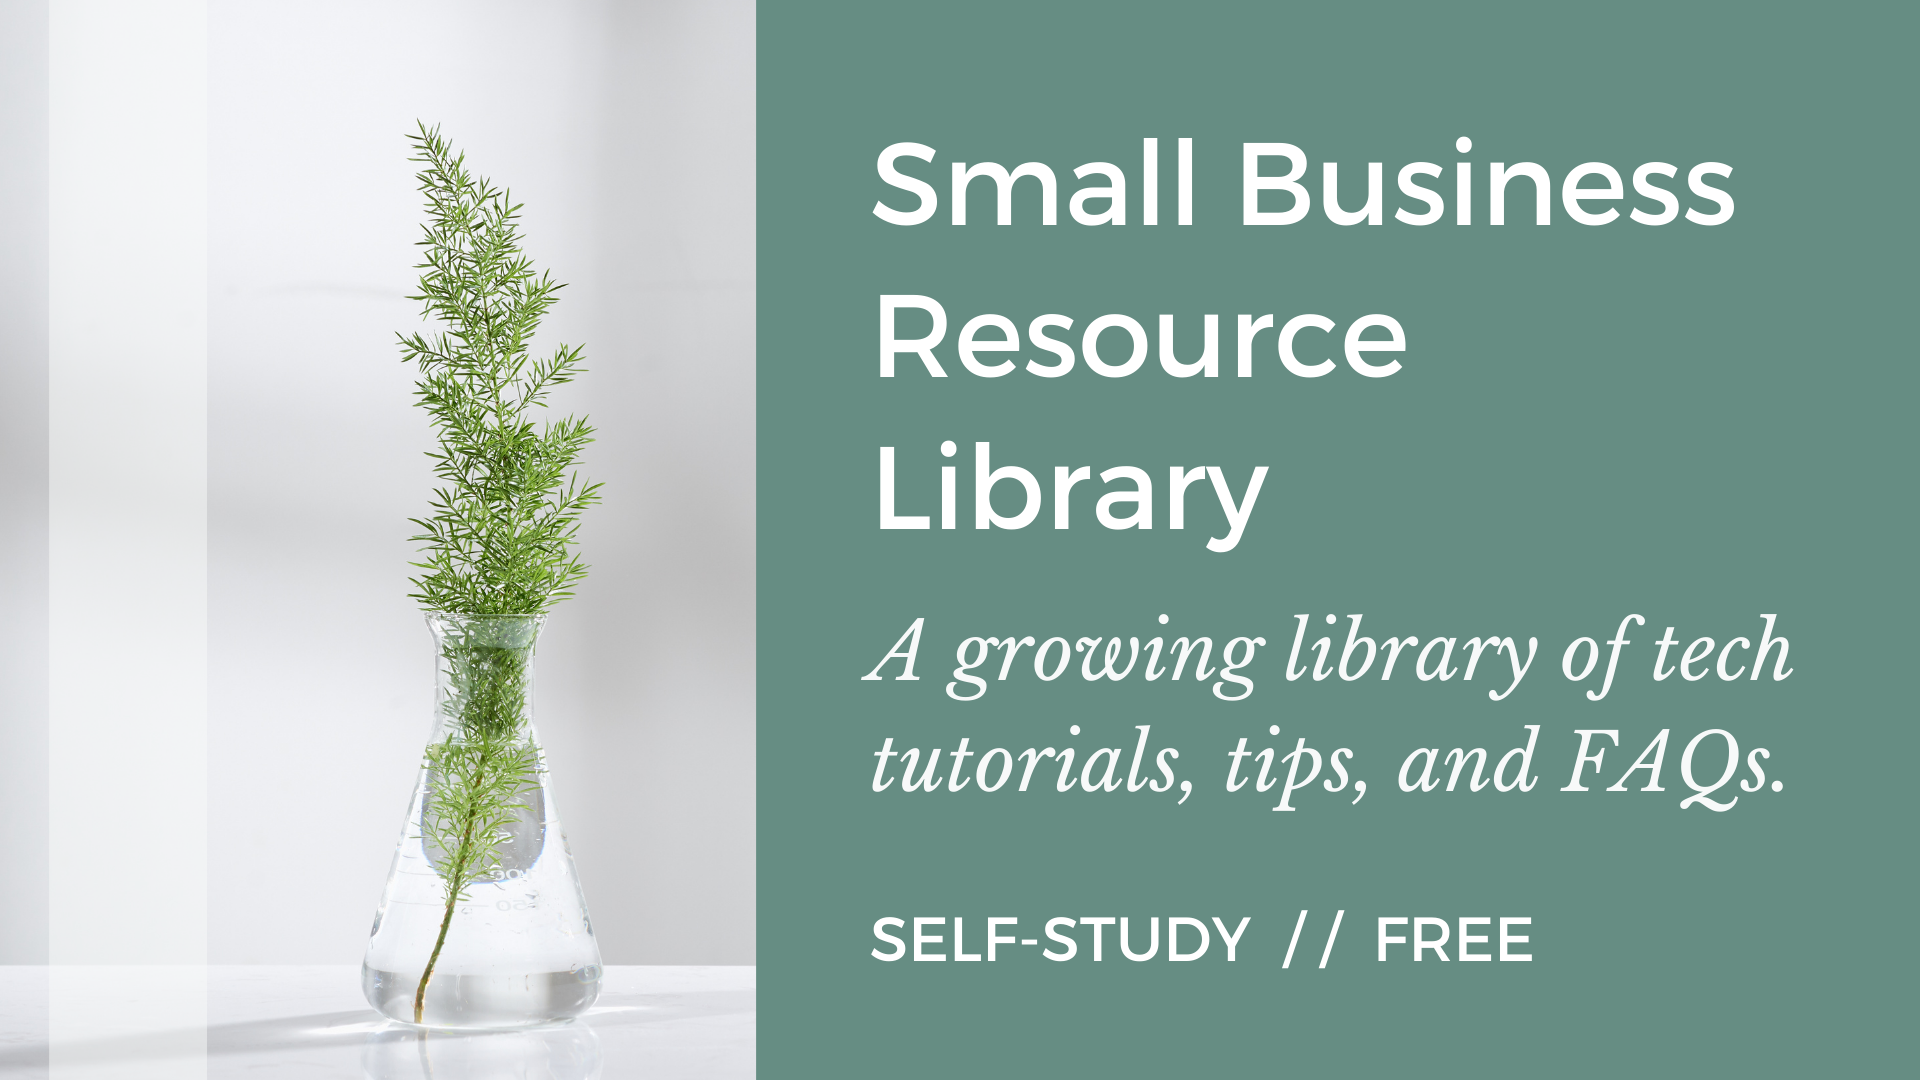 Small Business Resource Library